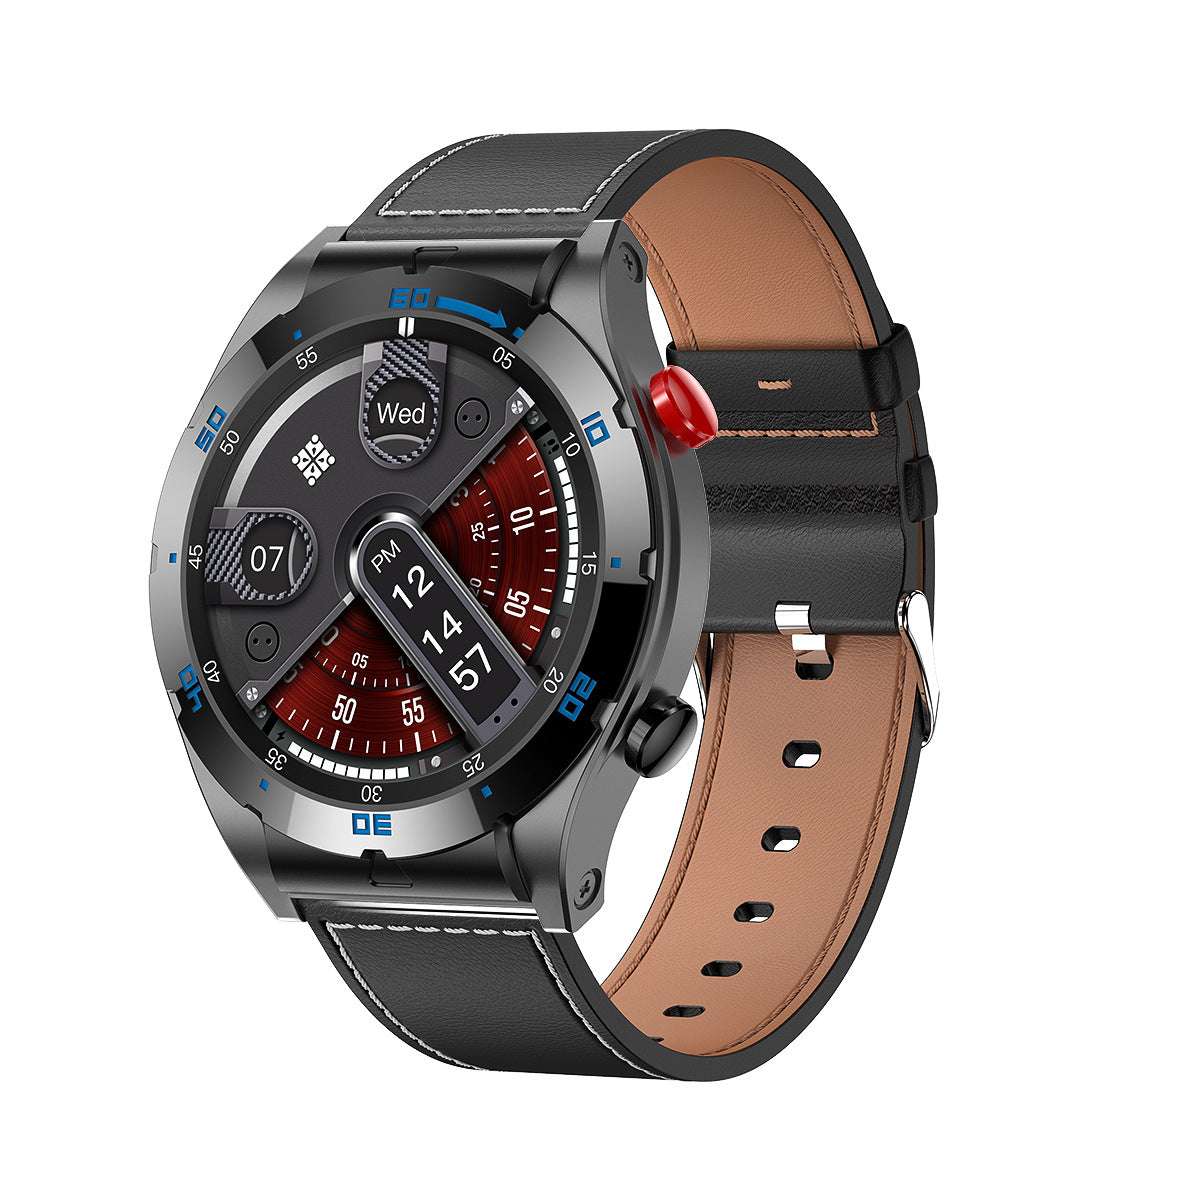 Bluetooth Health Tracker, EX102 Smart Watch, Heart Rate Monitor - available at Sparq Mart